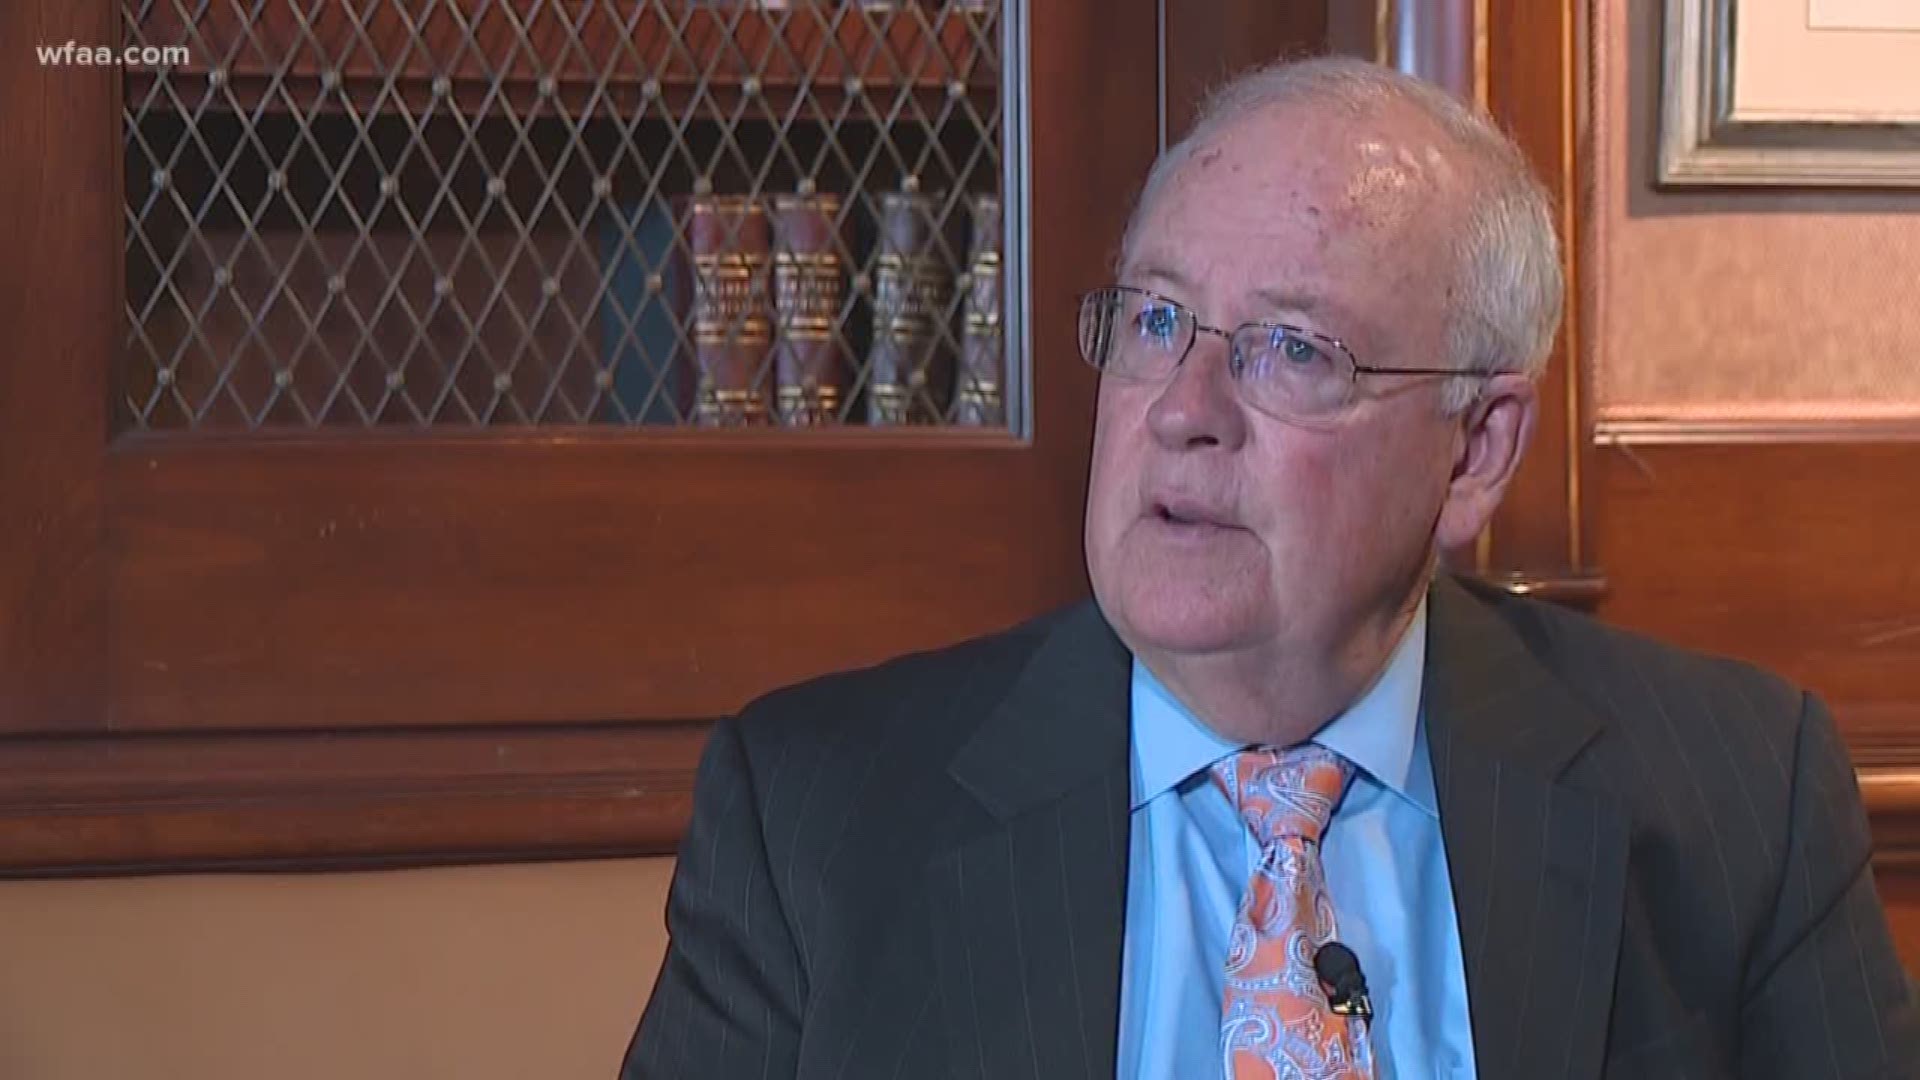 Texas native and former Baylor University president Ken Starr is reportedly joining President Trump's impeachment team.